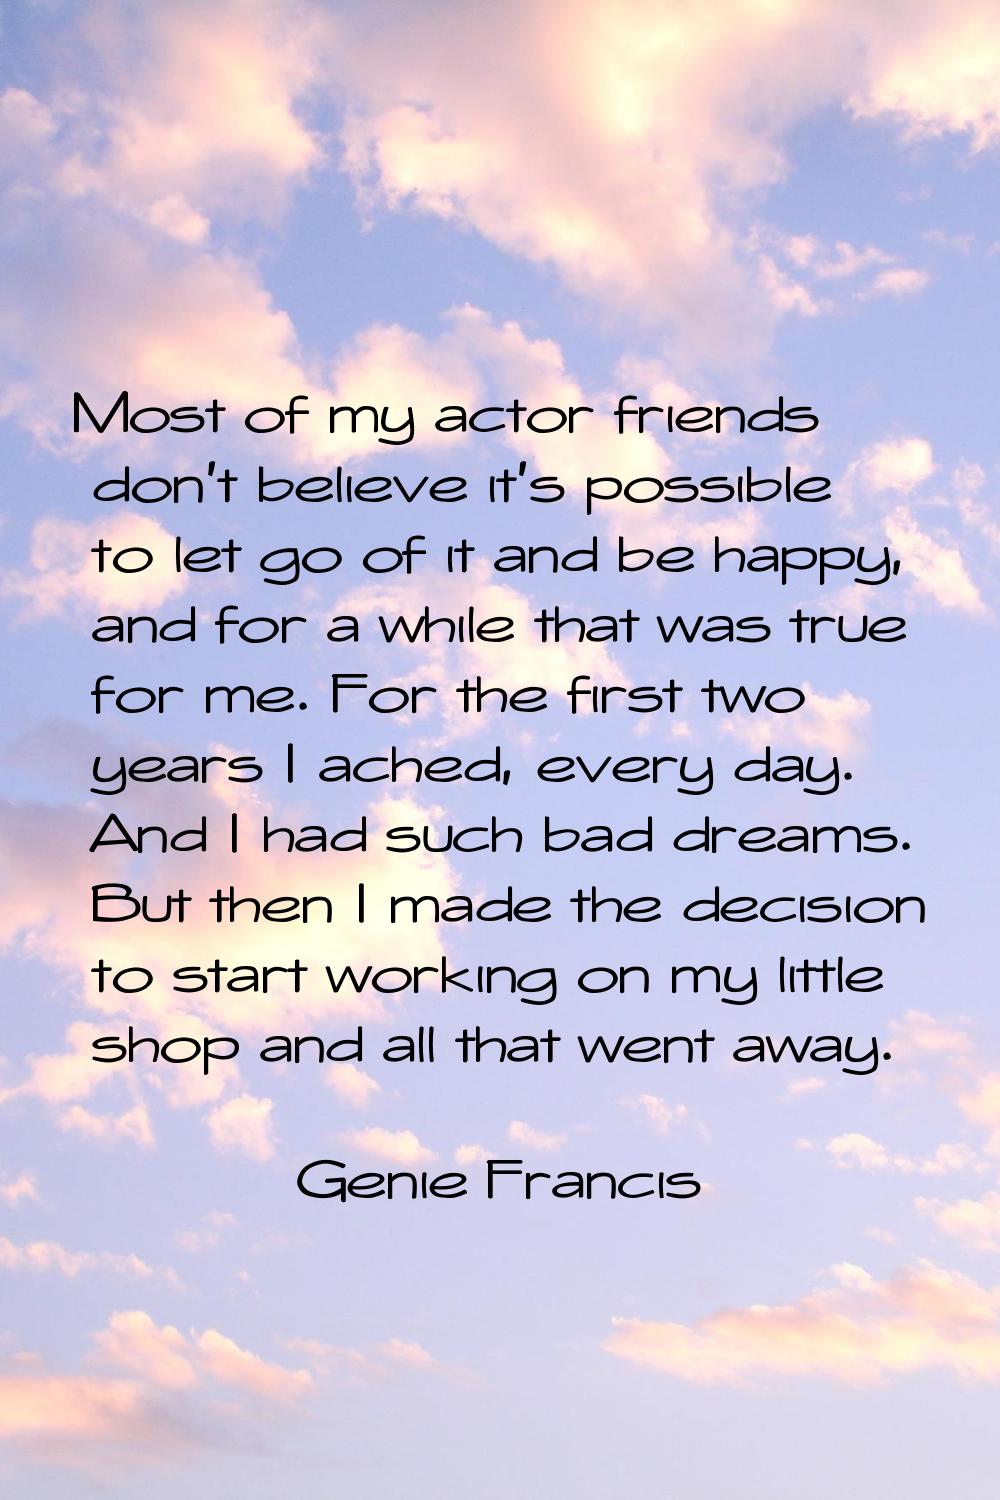 Most of my actor friends don't believe it's possible to let go of it and be happy, and for a while 